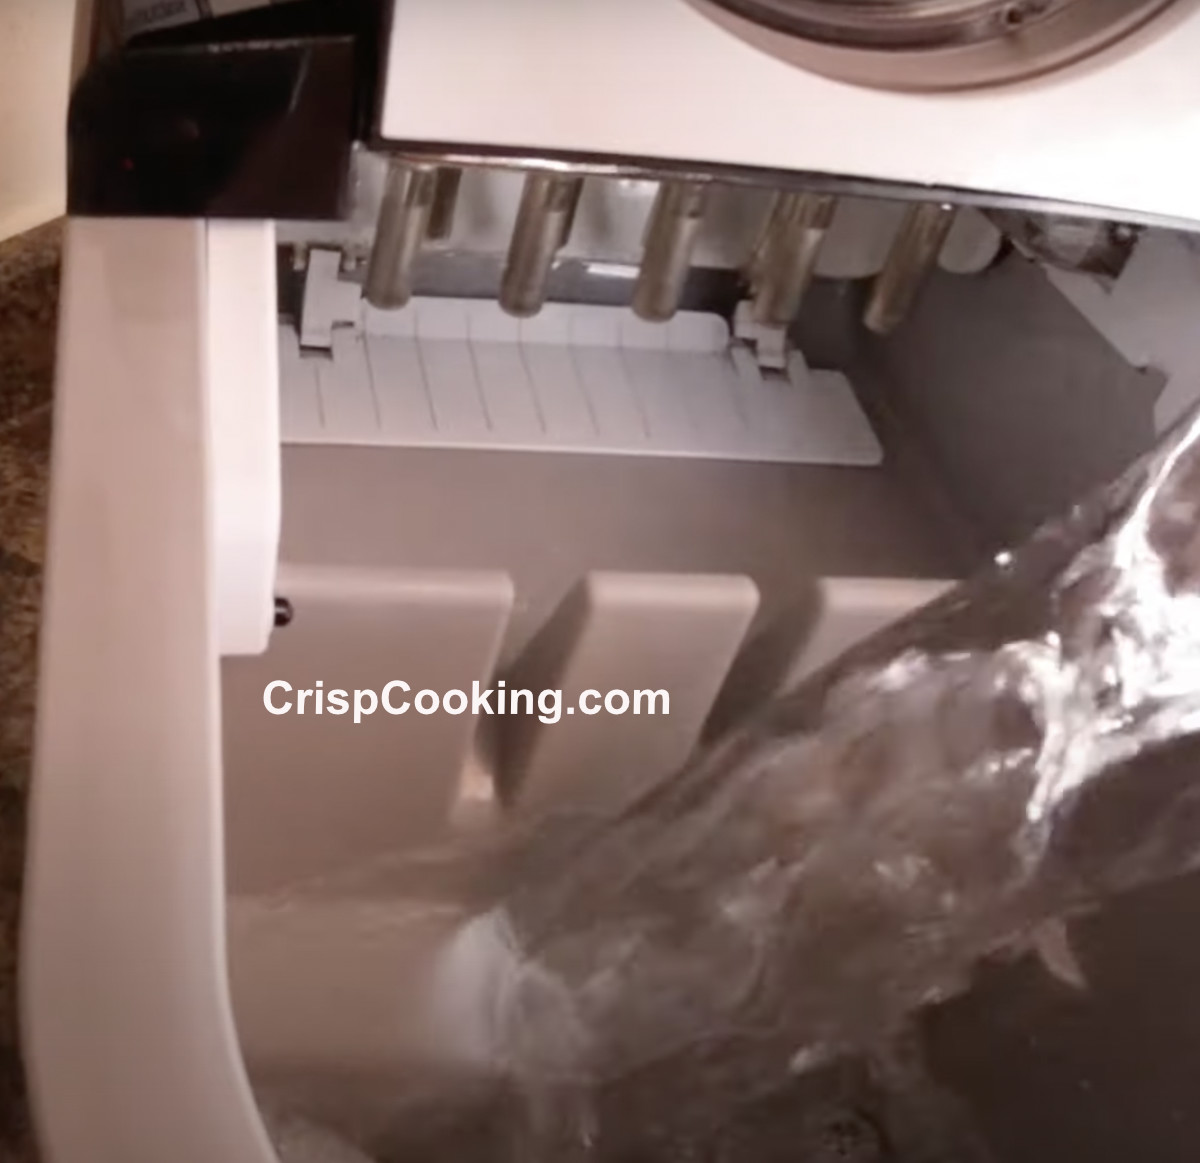 Pour cleaning solution to Frigidaire ice maker